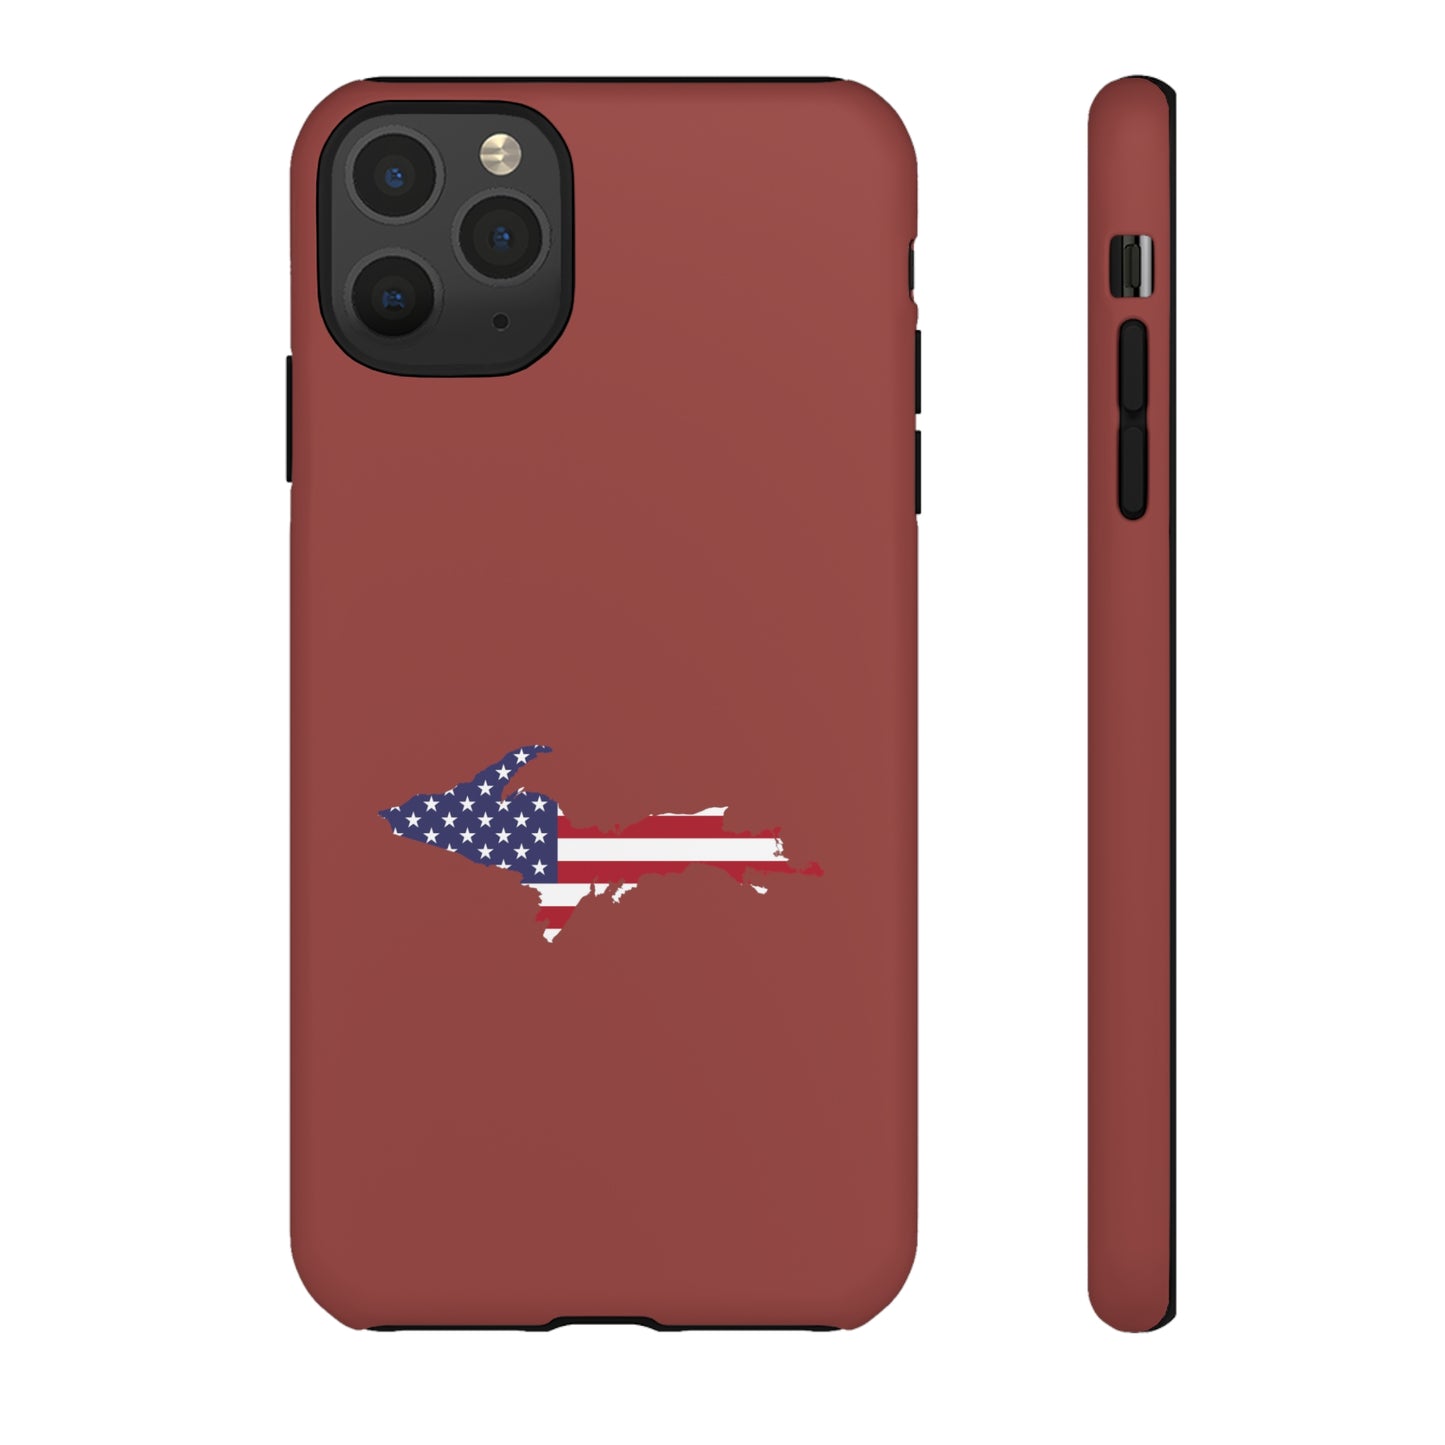 Michigan Upper Peninsula Tough Phone Case (Ore Dock Red w/ UP USA Flag Outline) | Apple iPhone